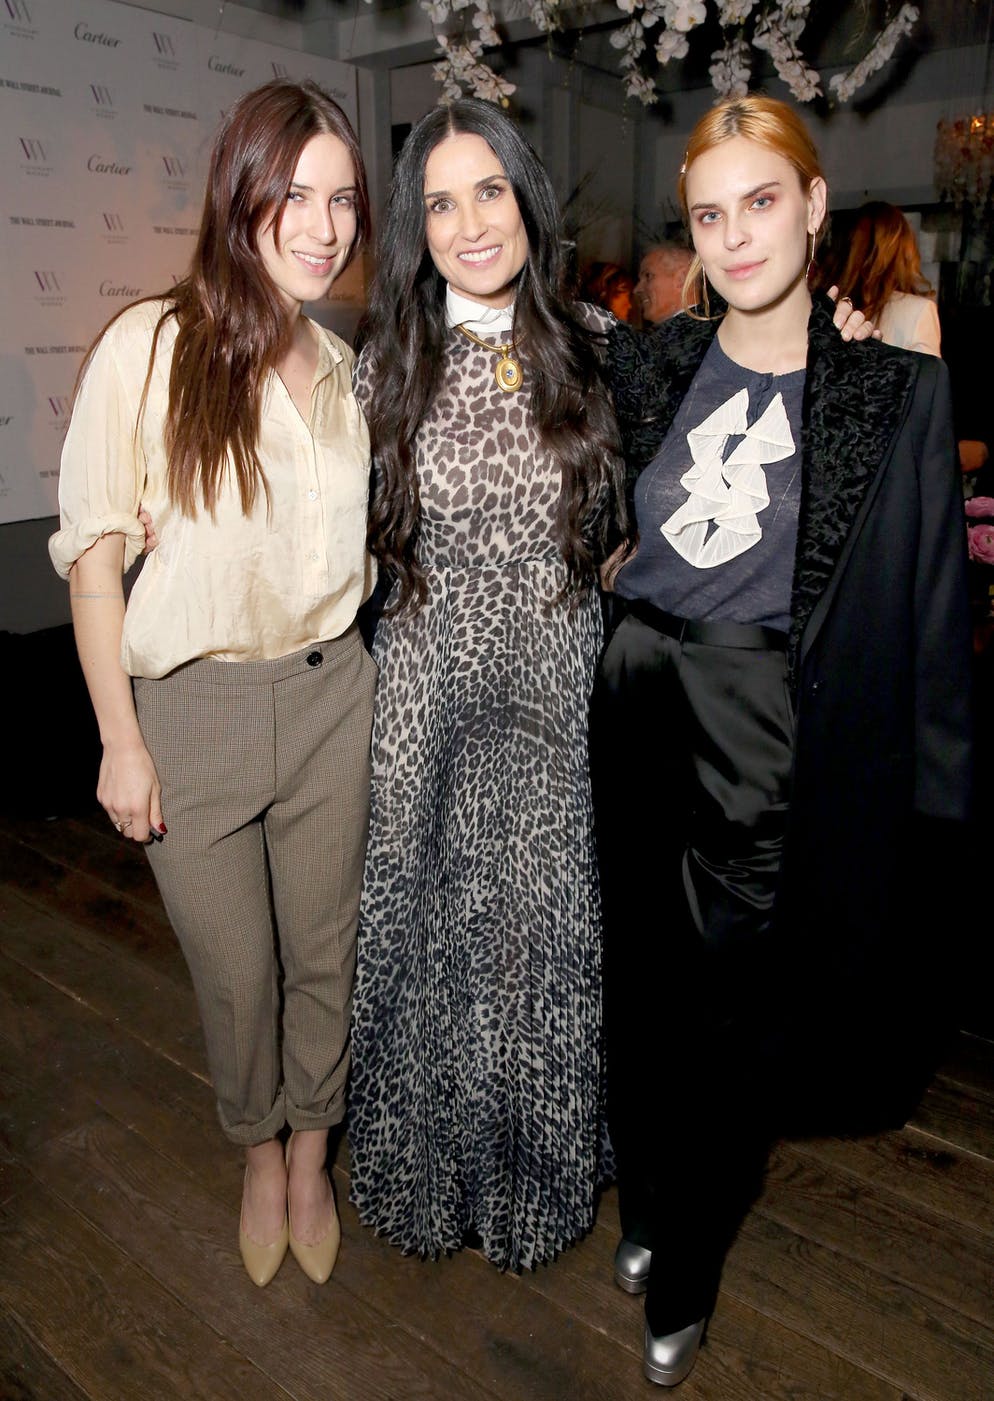 Beverly Hills, CA - MARCH 8: Demi Moore (center) and her daughters Scout laRue Willis and Tallulah Willis attend Visionary Women's Tribute to activist and actress Demi Moore in celebration of International Women's Day on March 8, 2018 in Beverly Hills, California.  (Photo by Rachel Murray/Getty Images for Salon of Insightful Women)